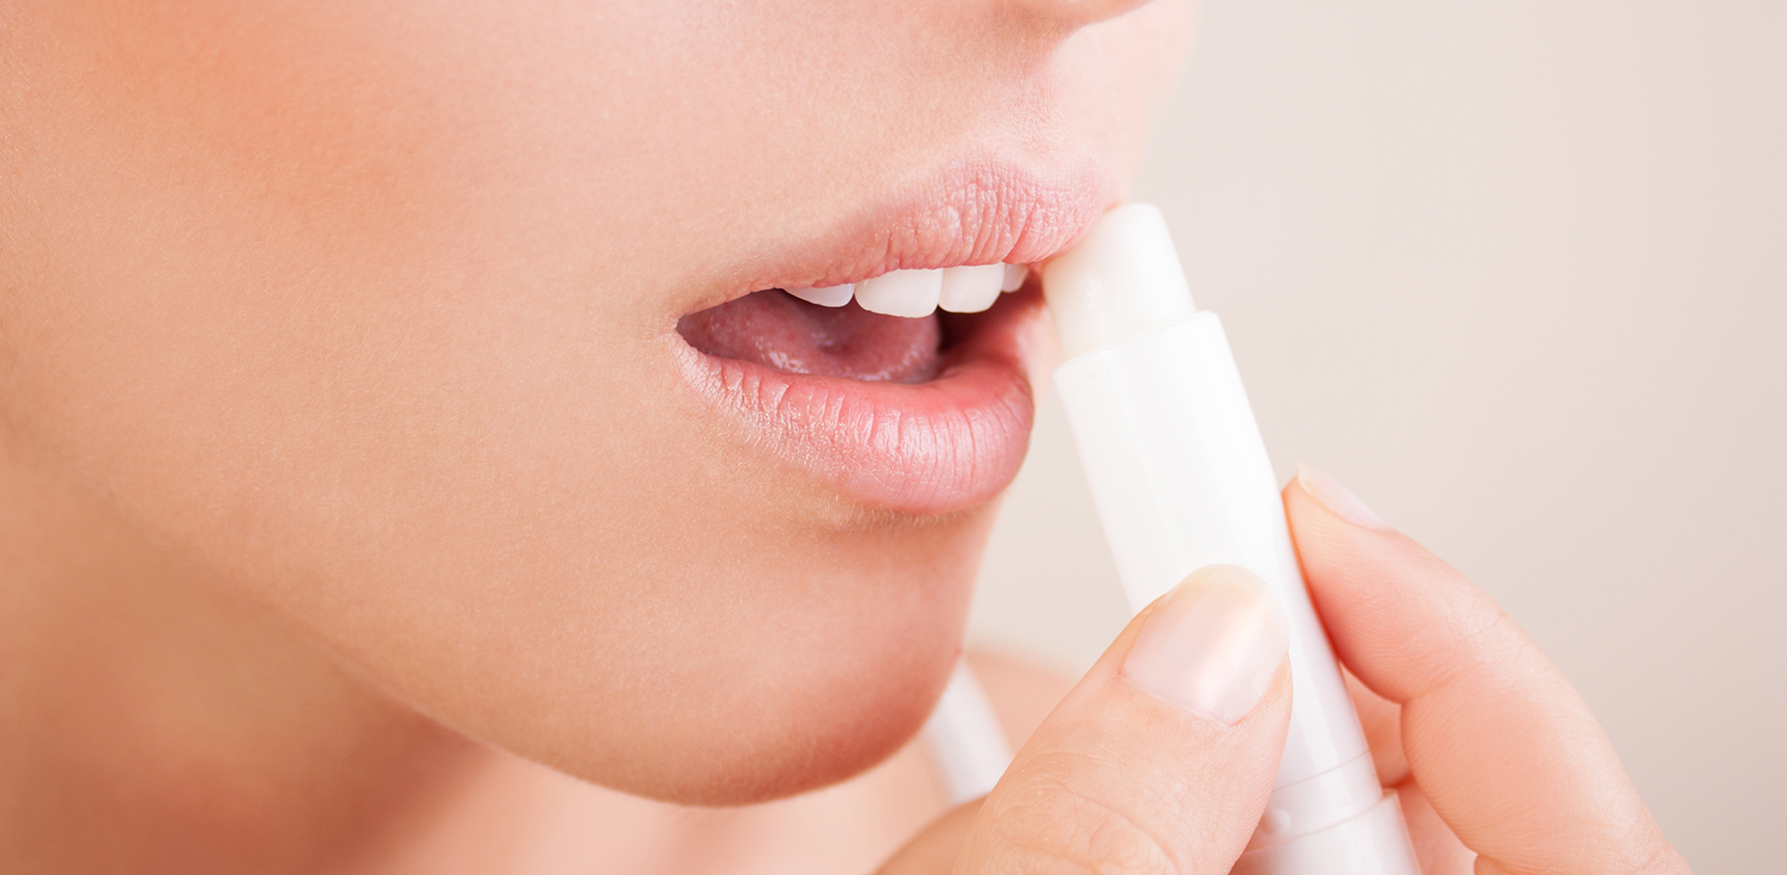 perfect-skin-care-routine-for-your-lips-woman-applying-lip-balm